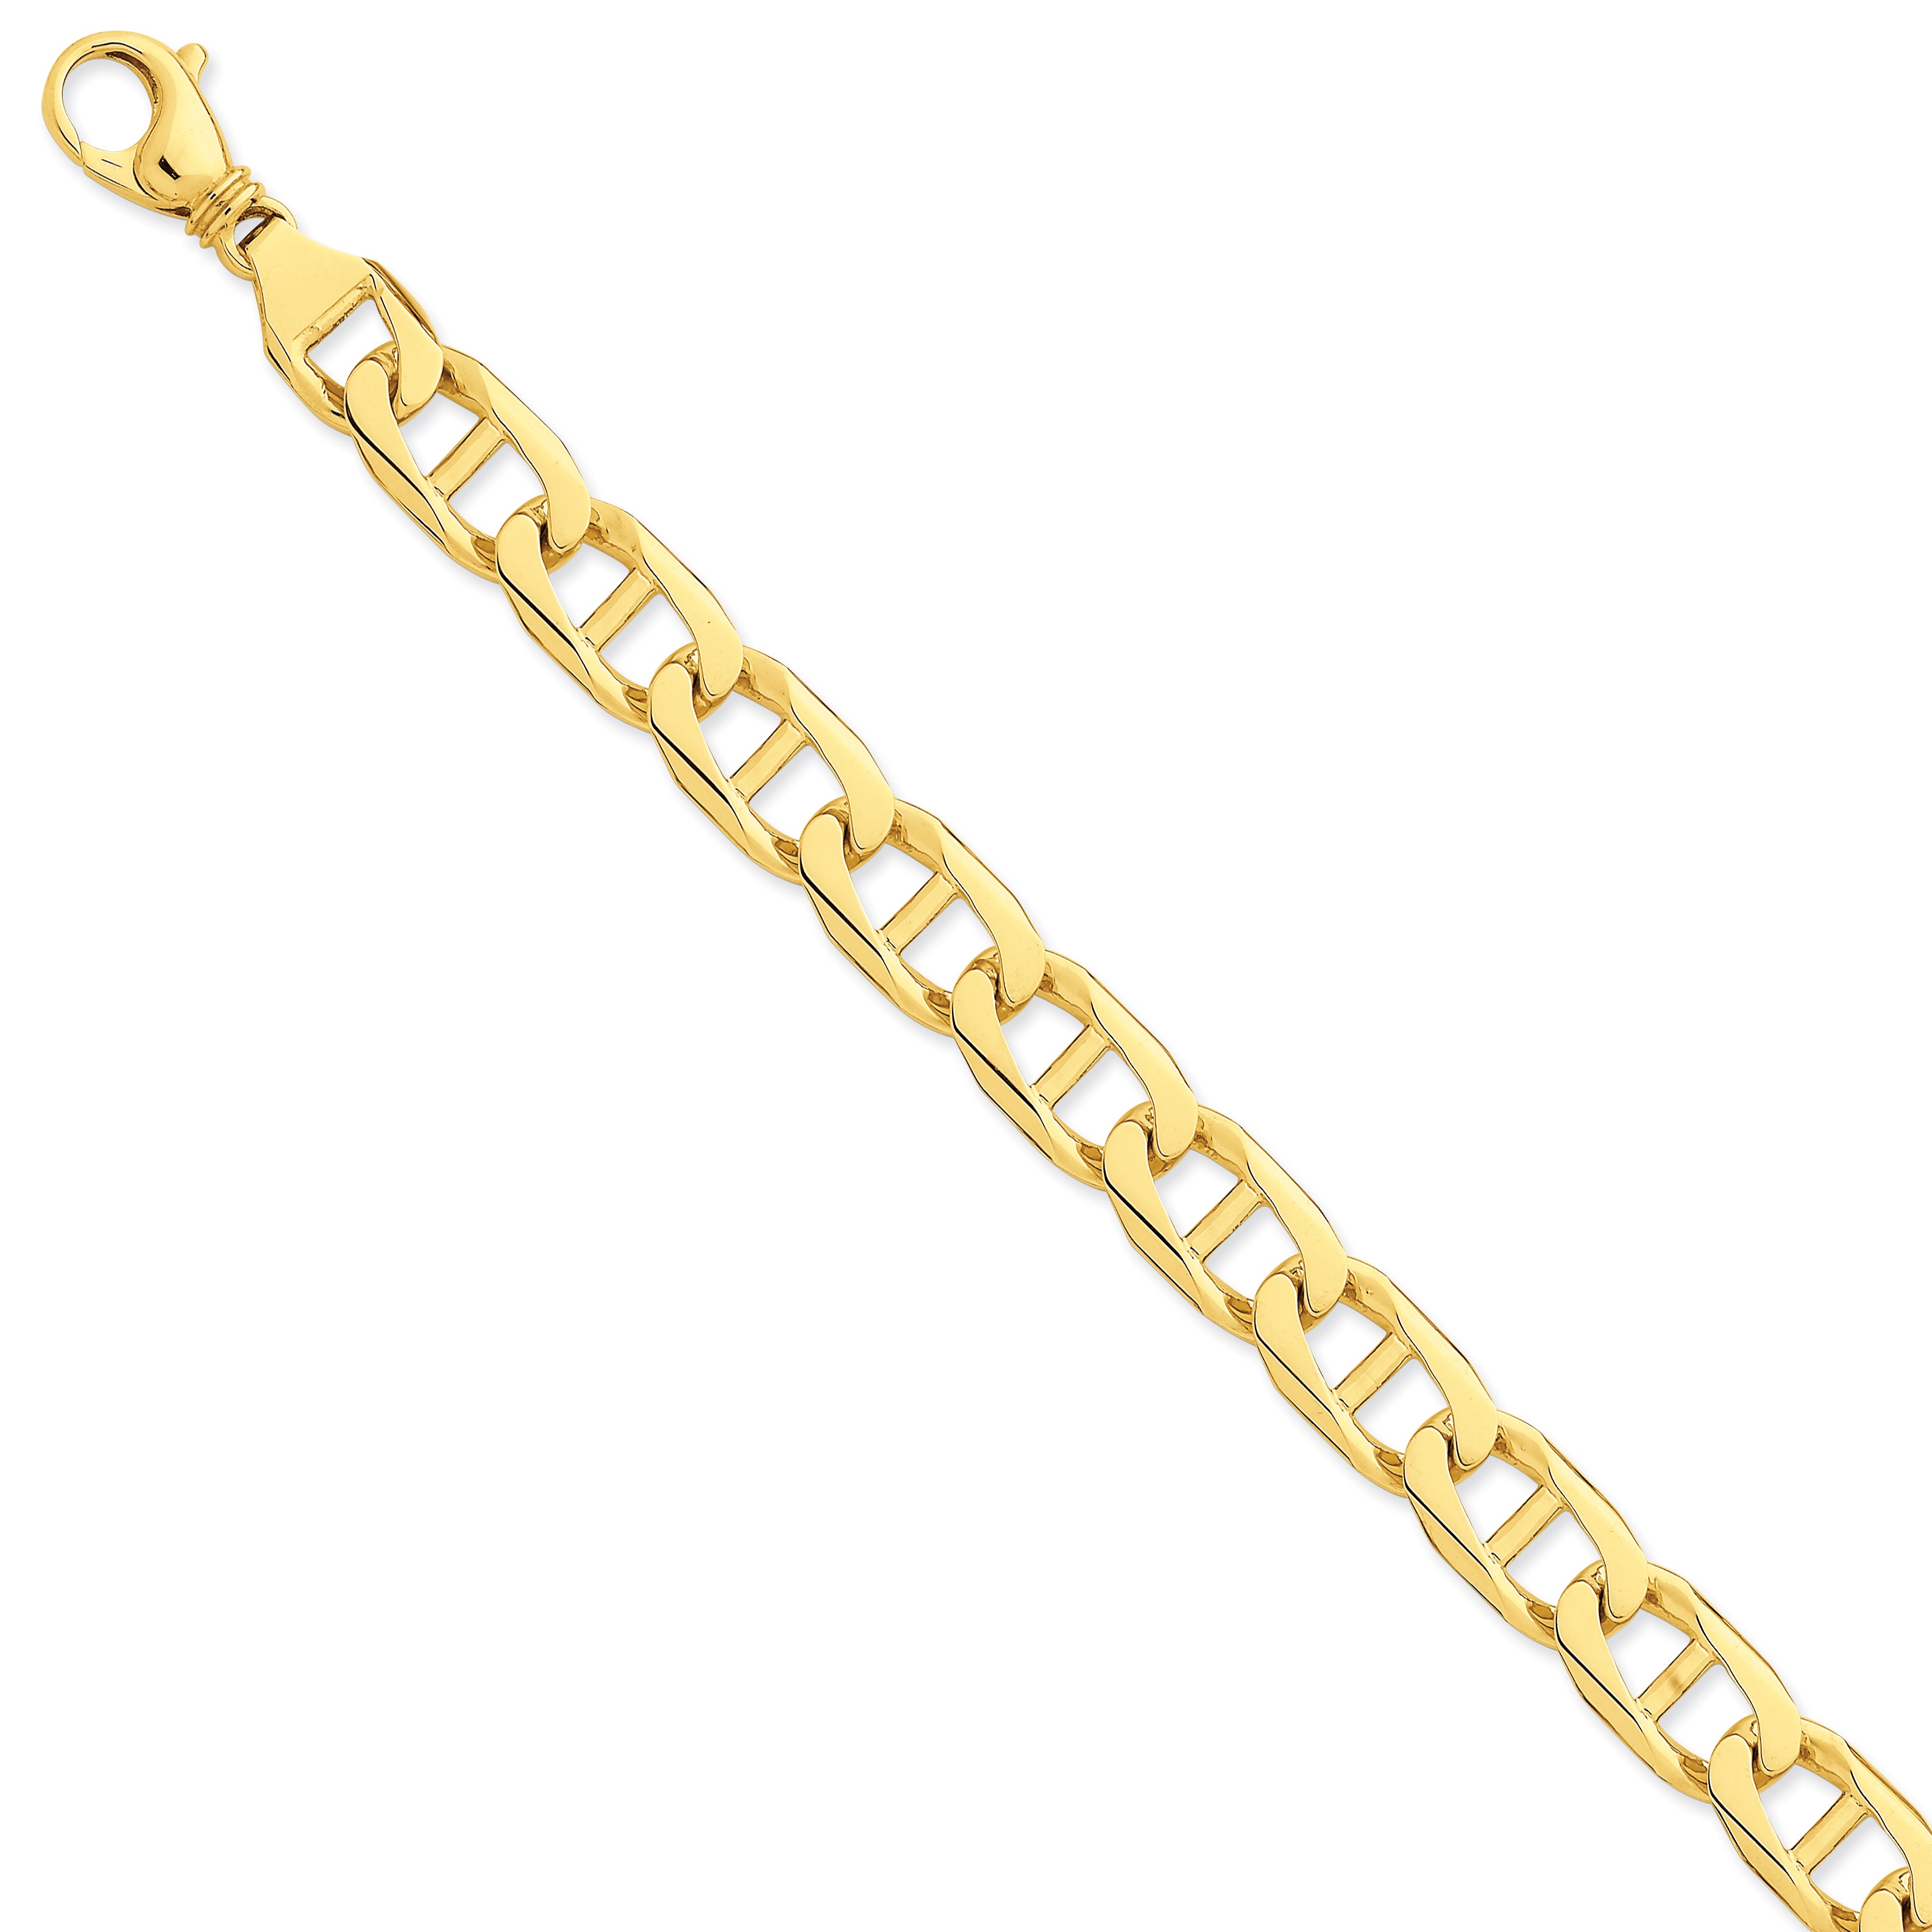 14K 10.8mm Hand-polished Anchor Link Chain